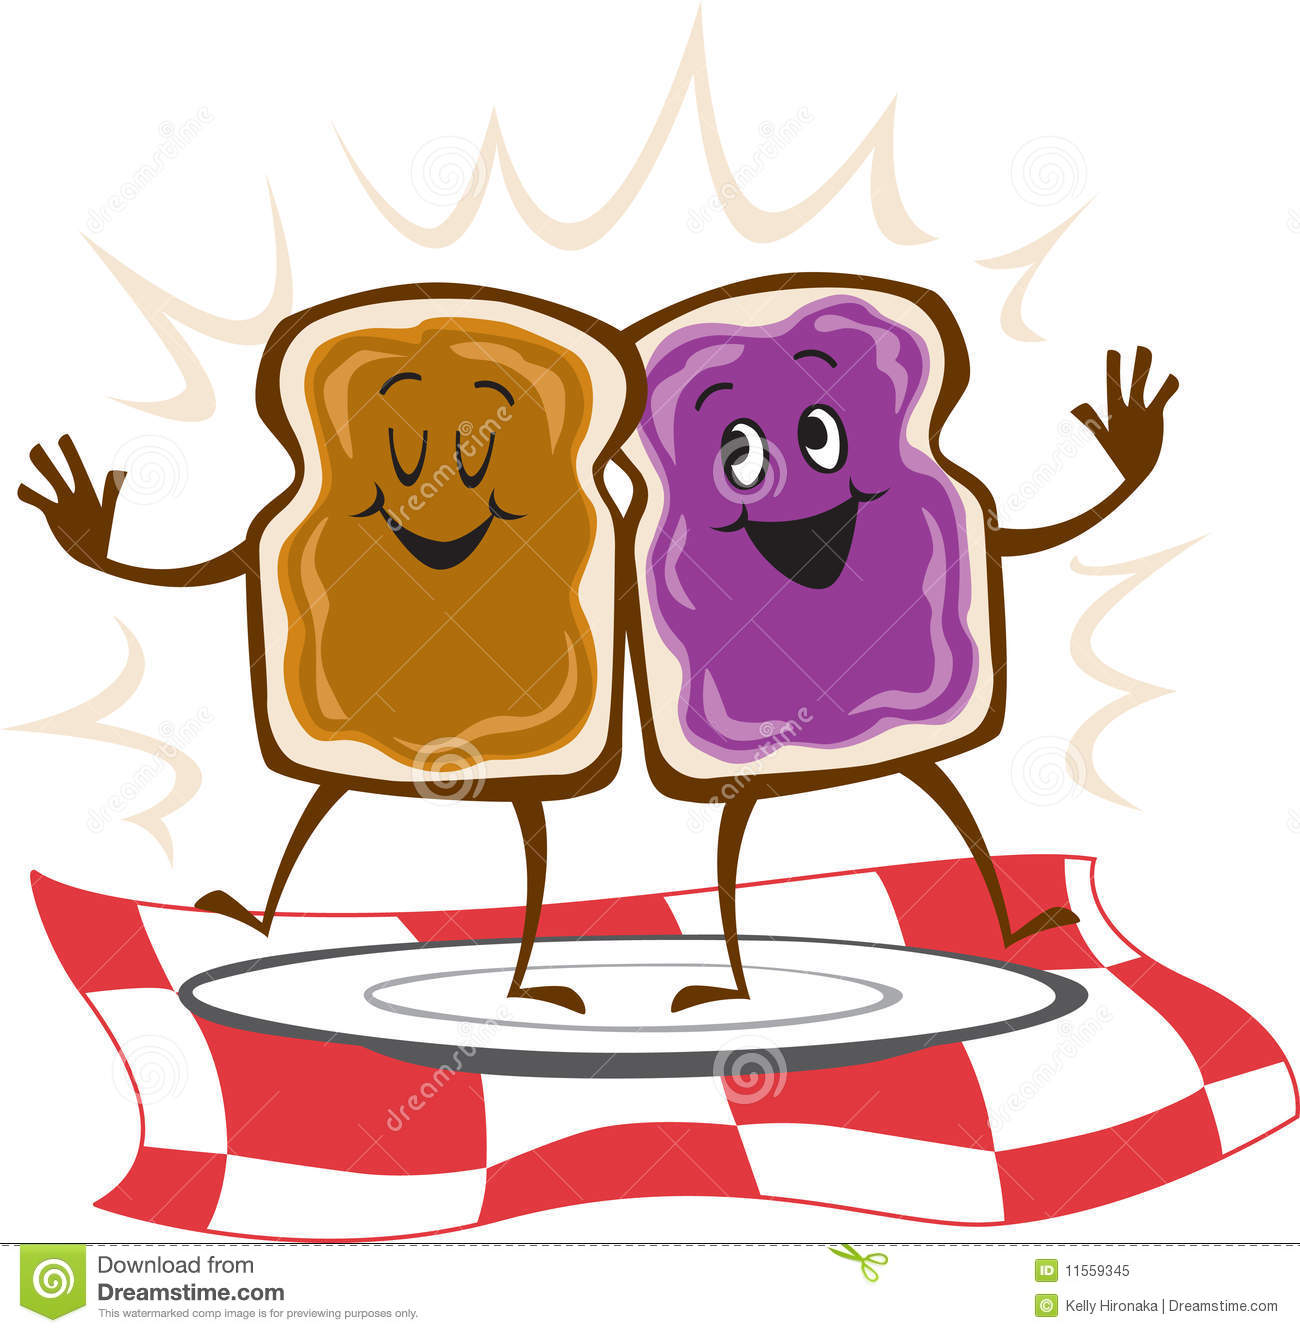 powerhouse clipart u0026middo - Peanut Butter And Jelly Clip Art